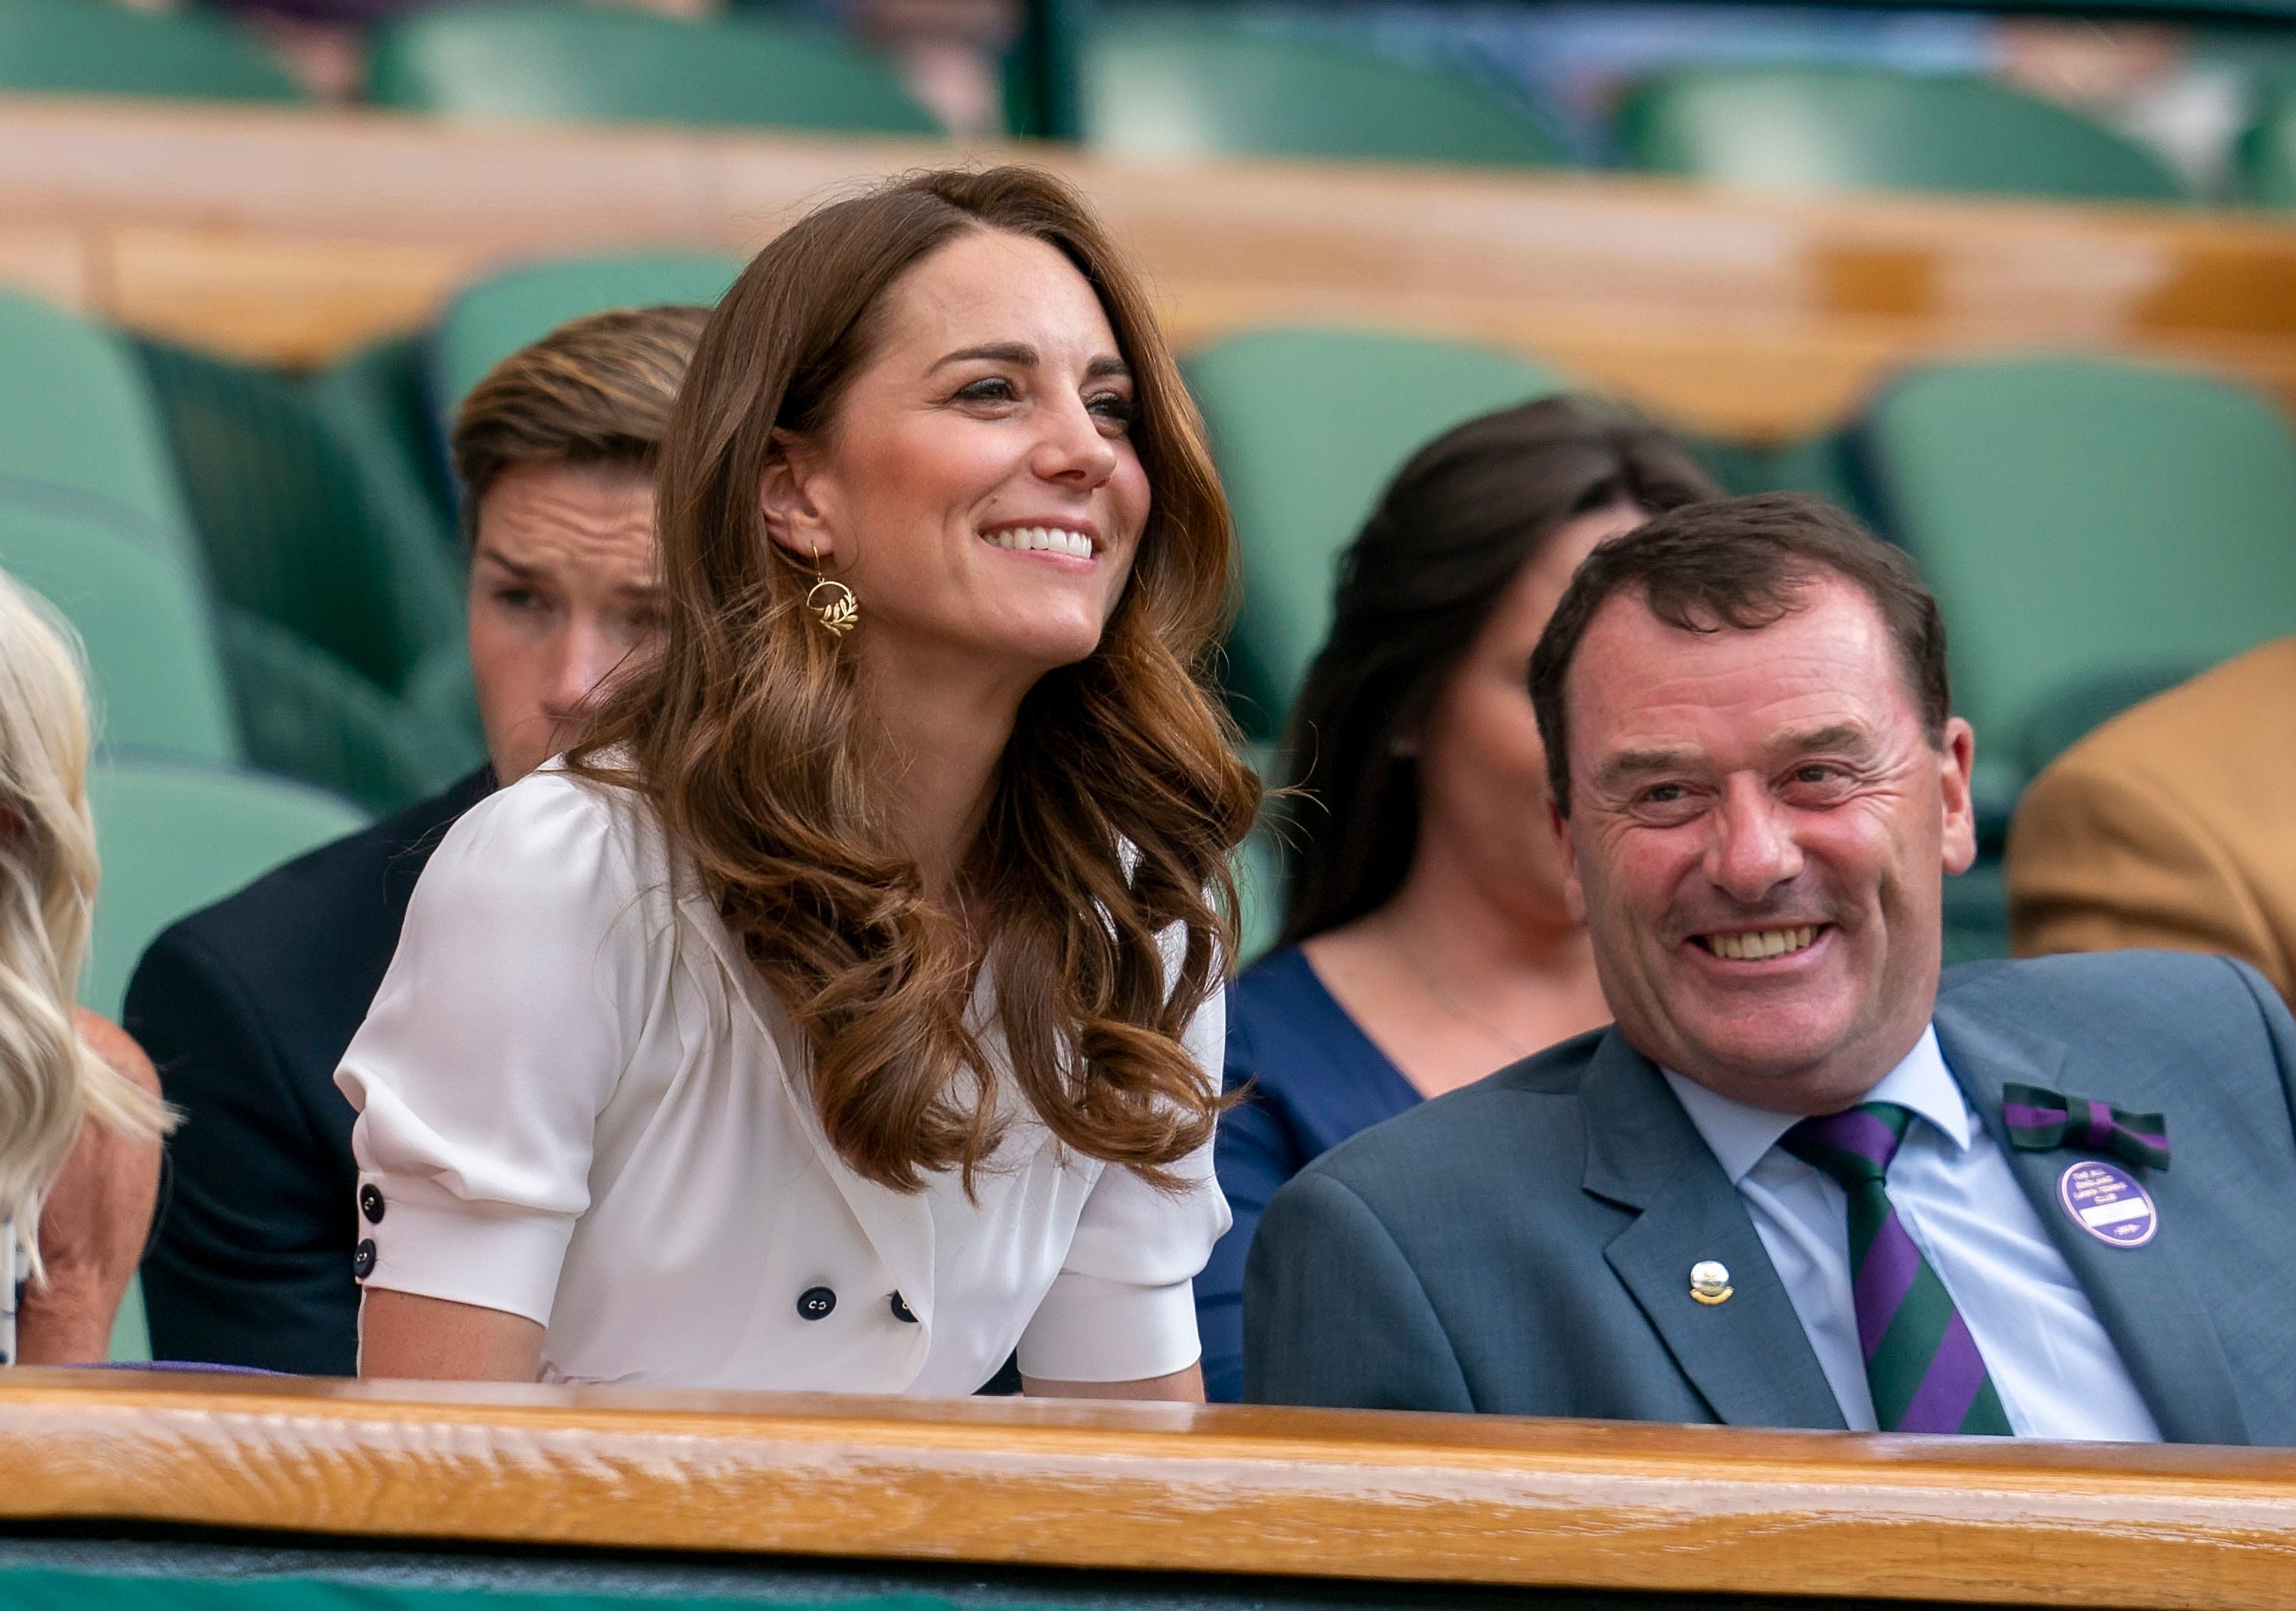 Princess Kate Middleton to attend Wimbledon final in rare public appearance: Reports